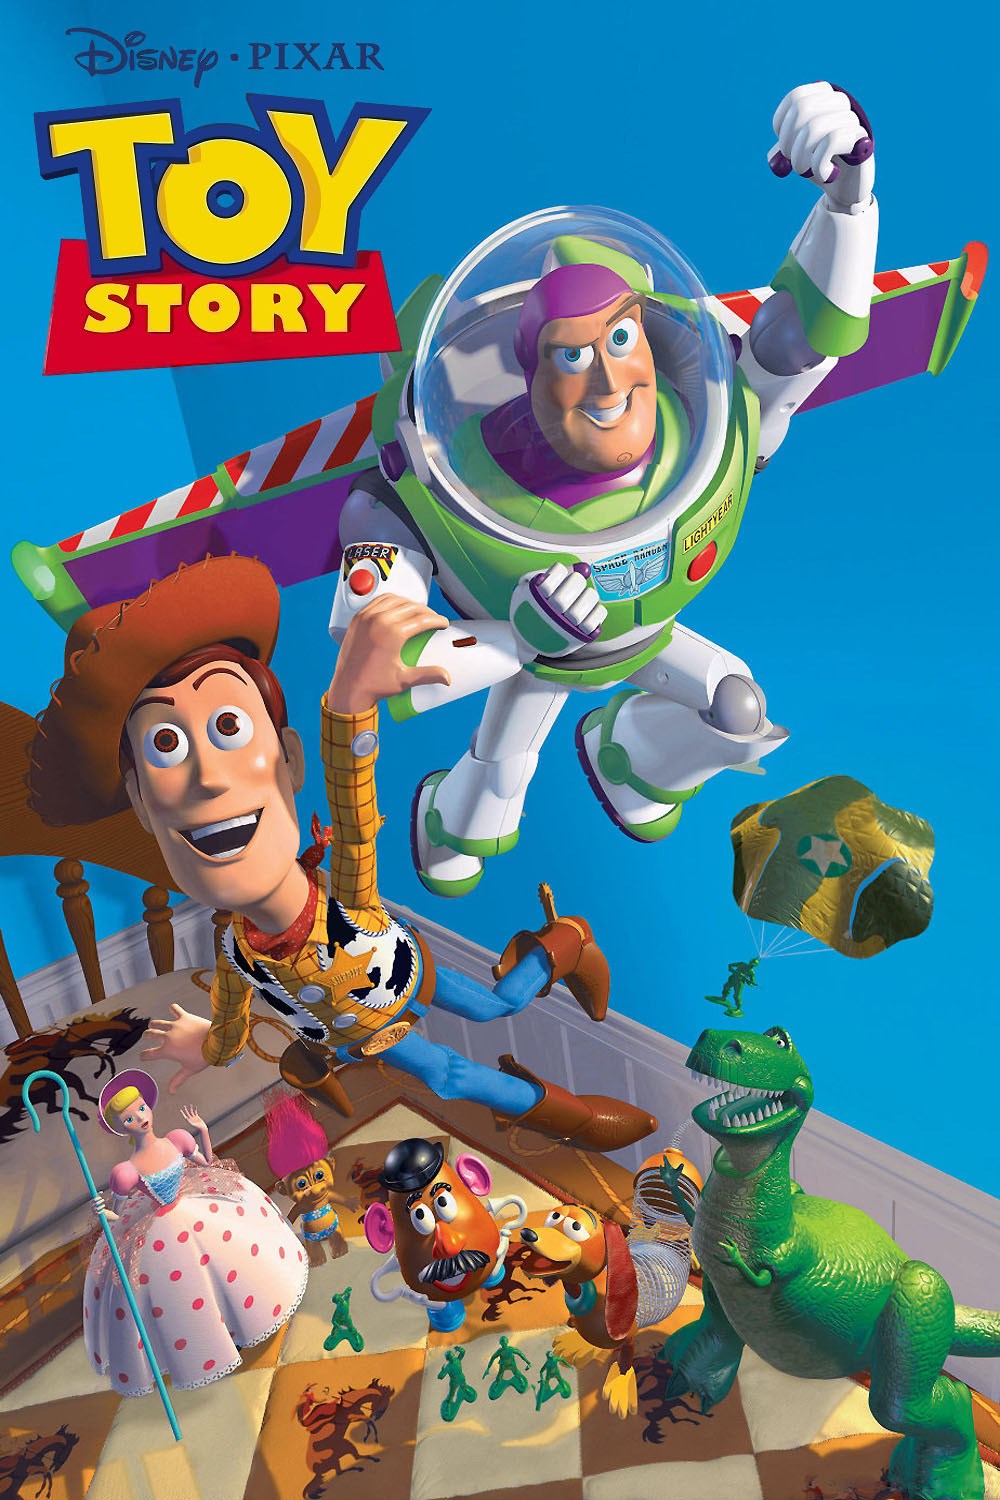 Toy Story YIFY subtitles - ysubscom